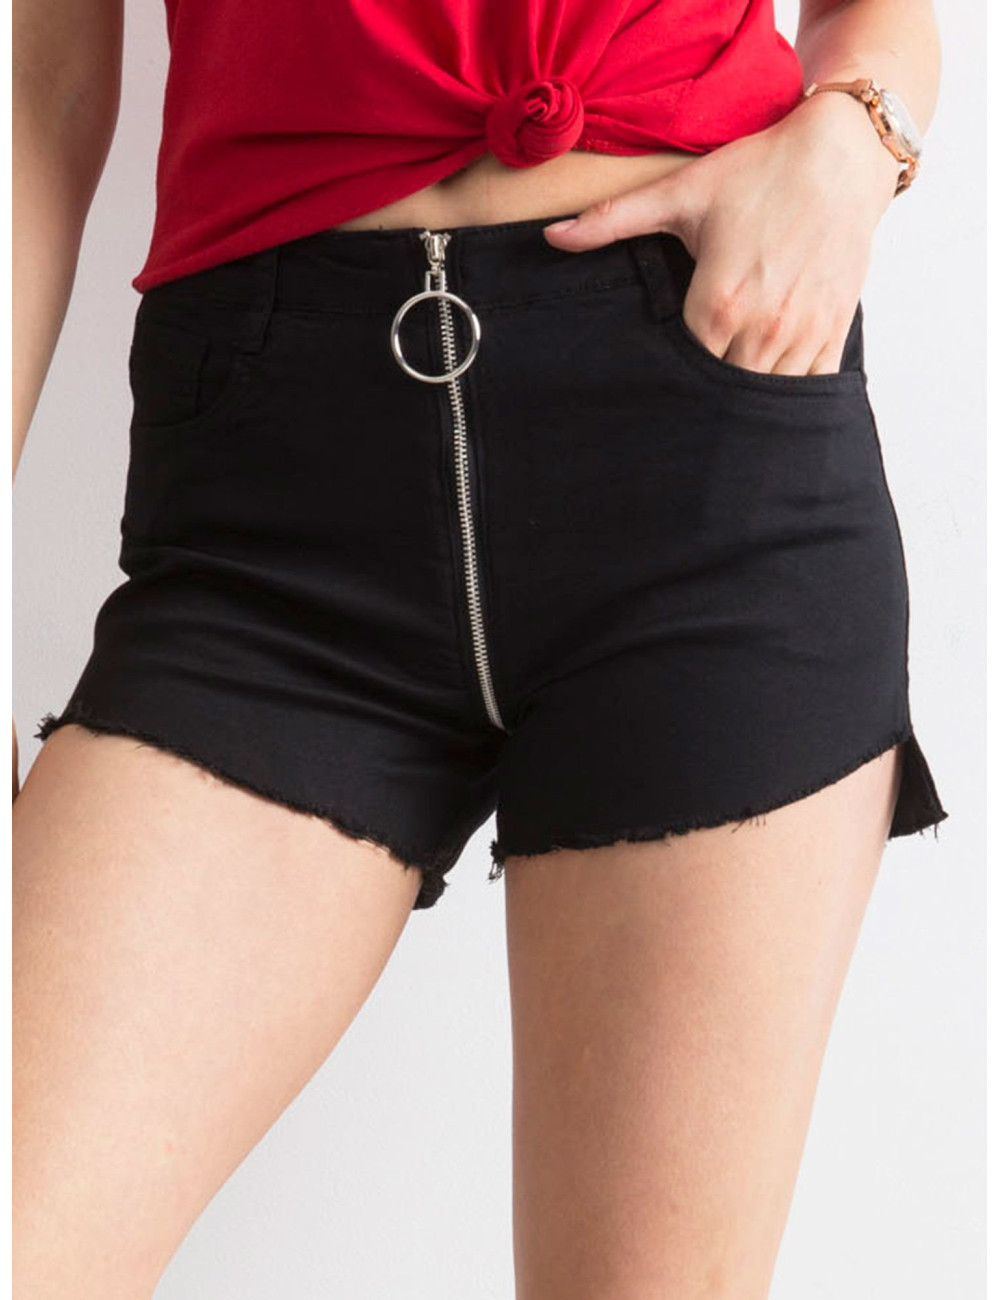 Black shorts with zipper 